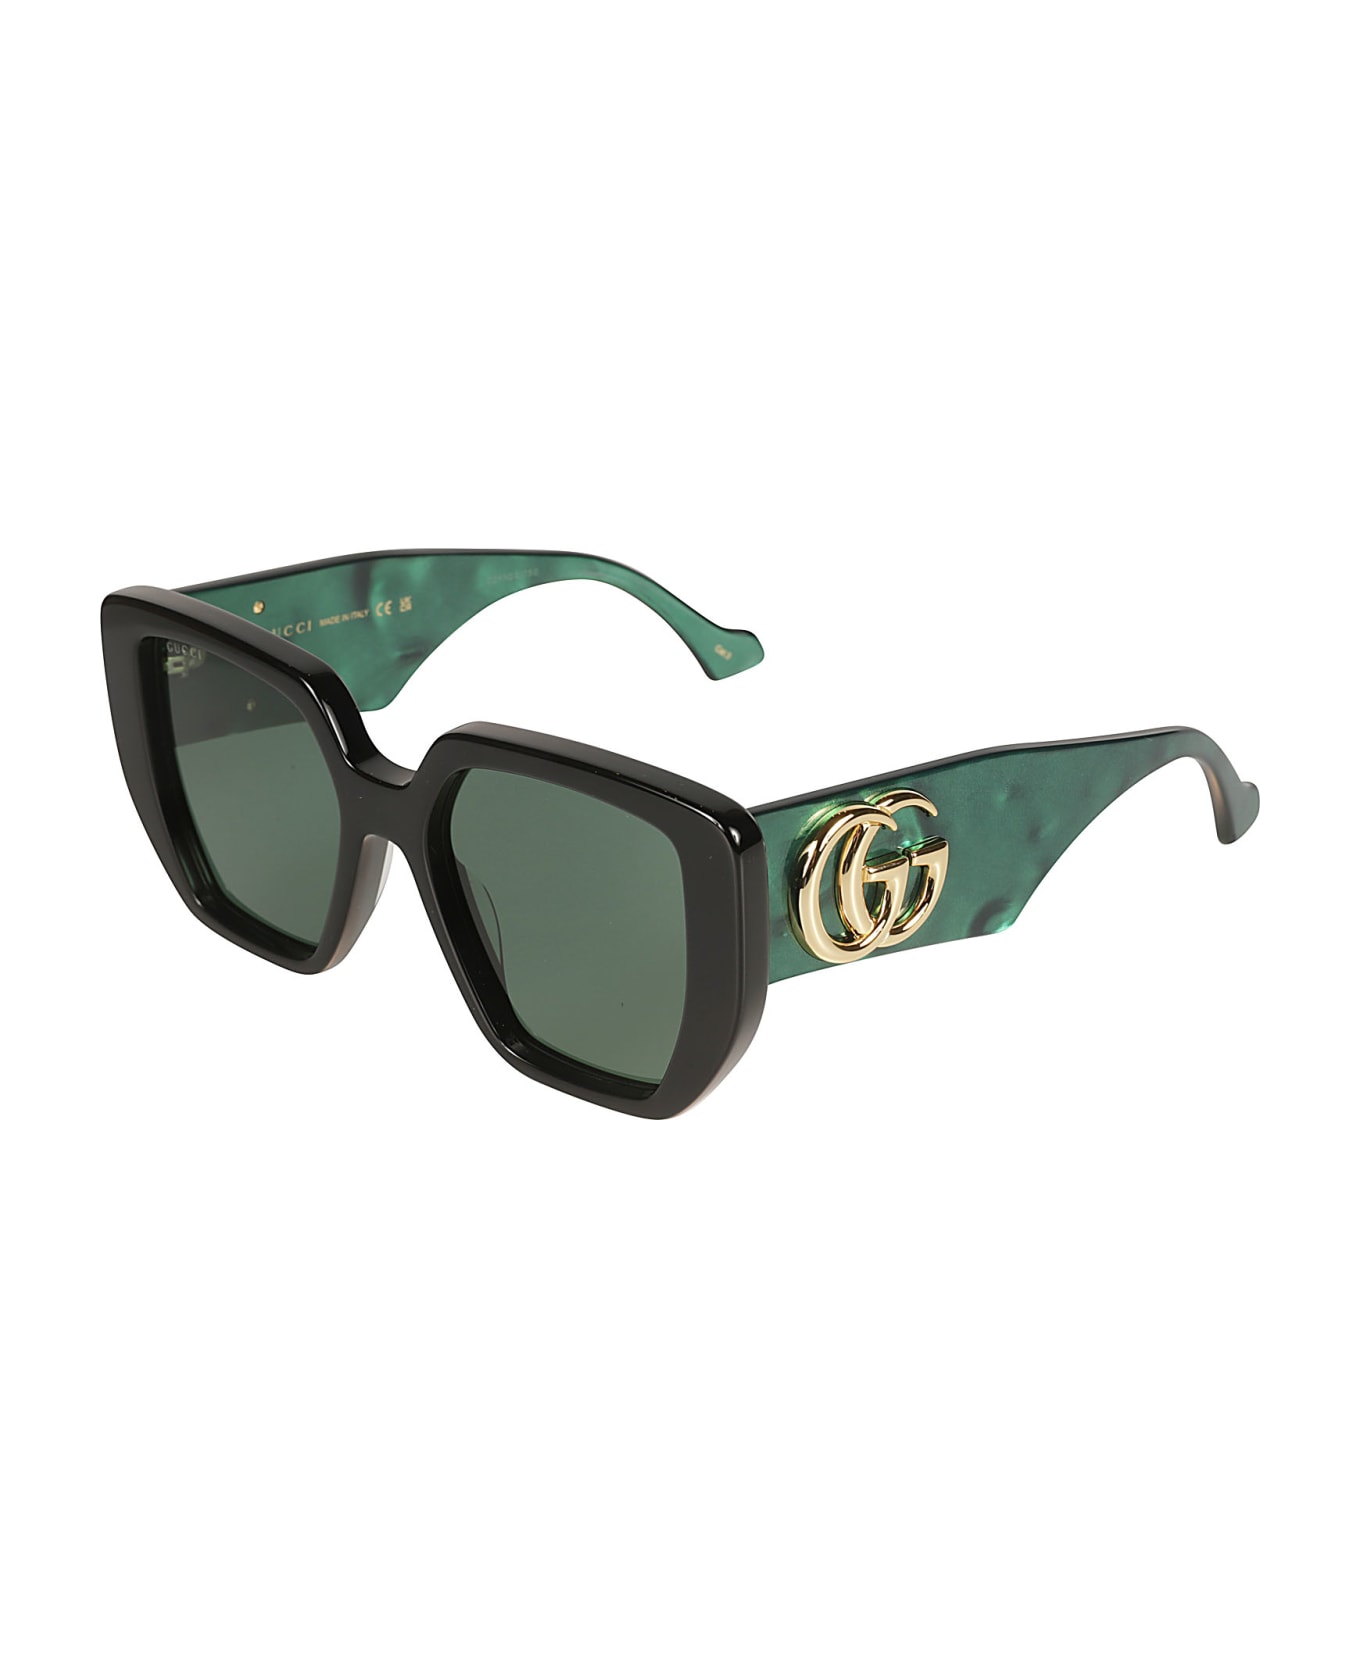 Gucci Eyewear Double Gg Plaque Square Frame Sunglasses - Black/Green